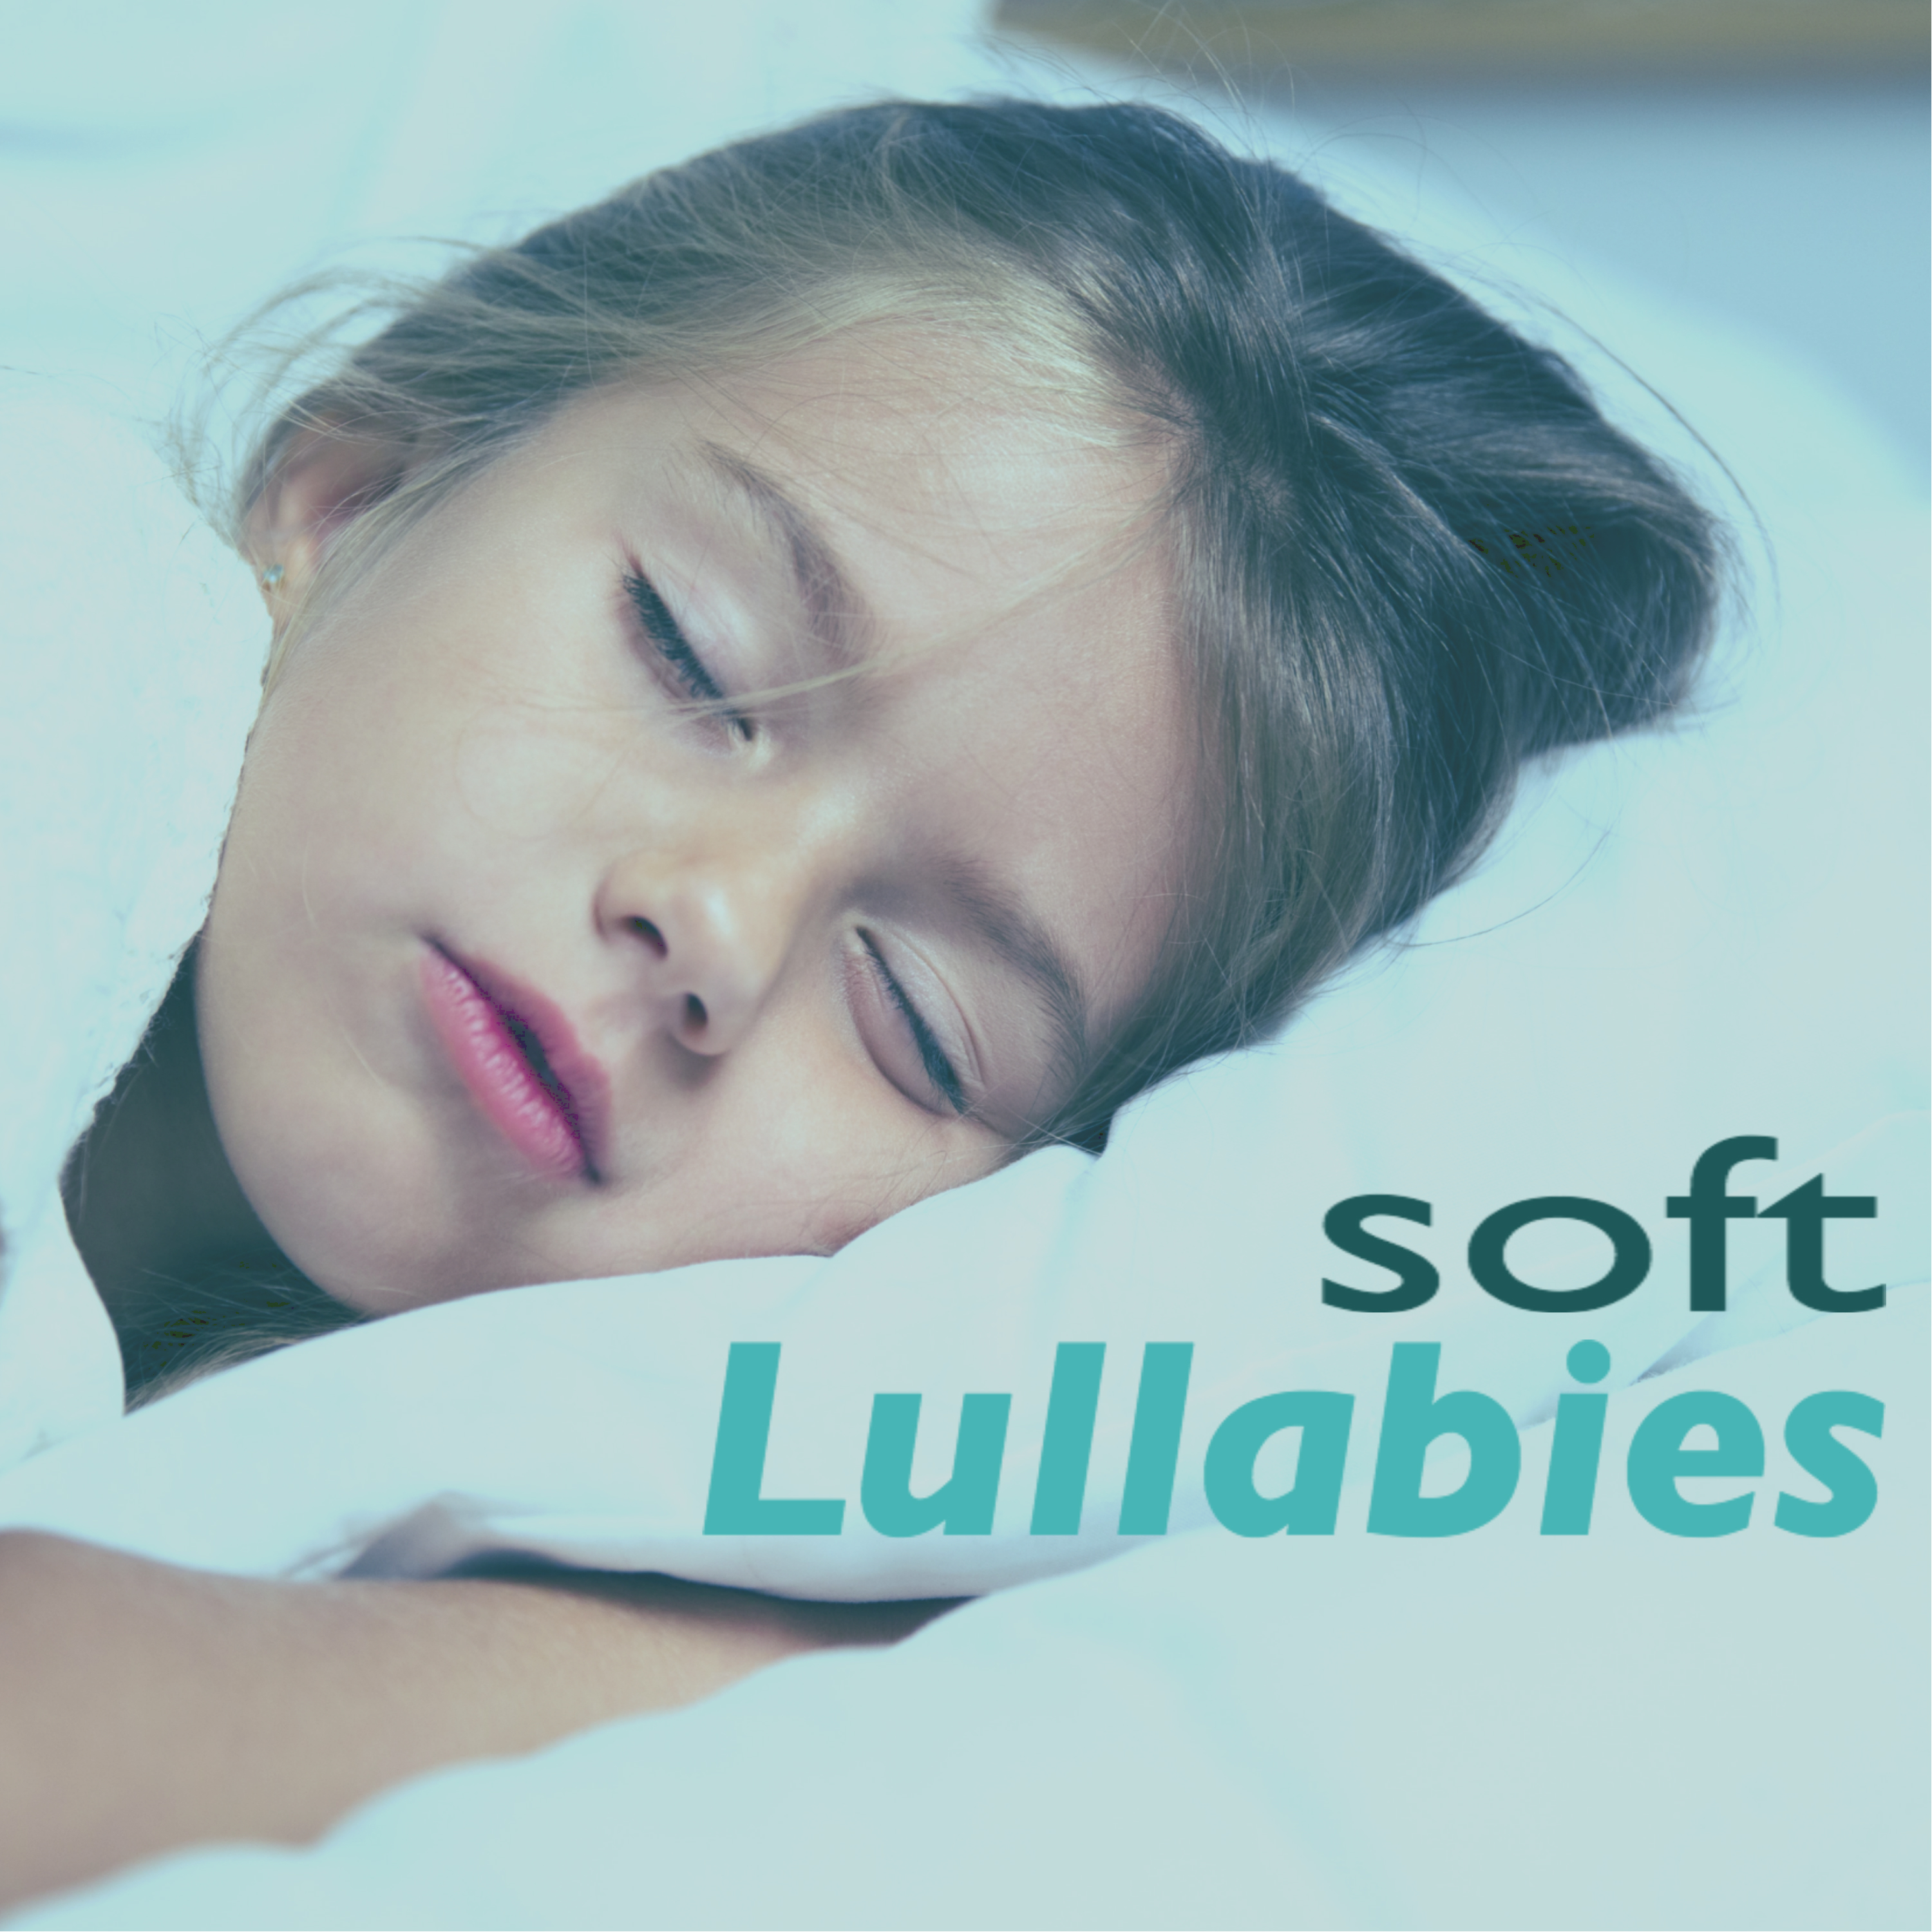 Soft Lullabies - Goodnight Lullaby Collection, Baby Songs & Easy Sleep Solutions